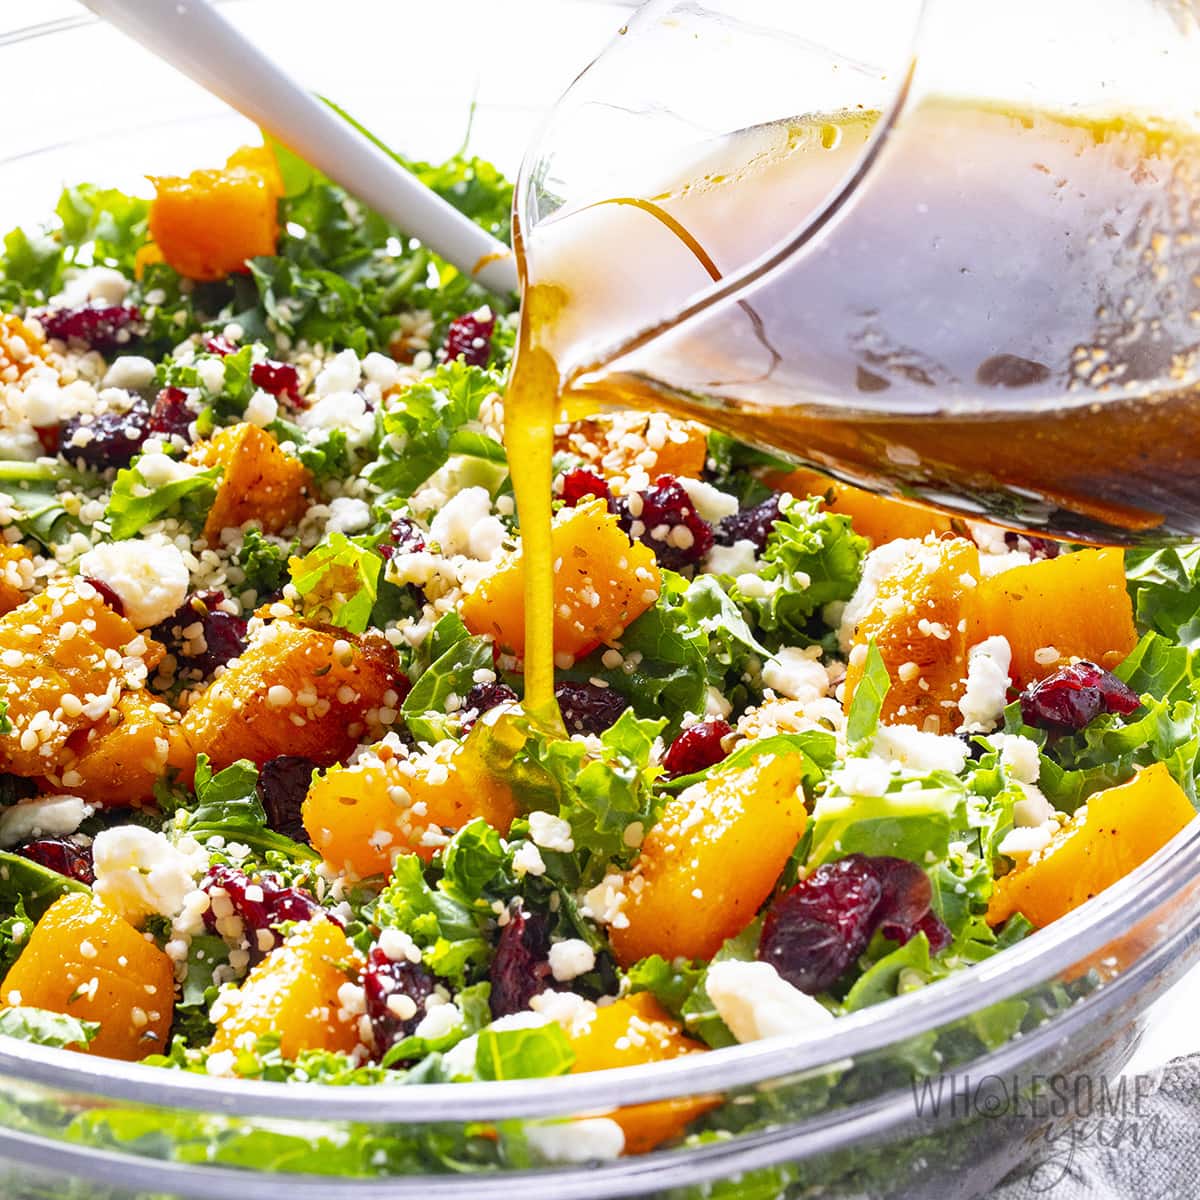 Butternut squash salad with dressing poured on top.